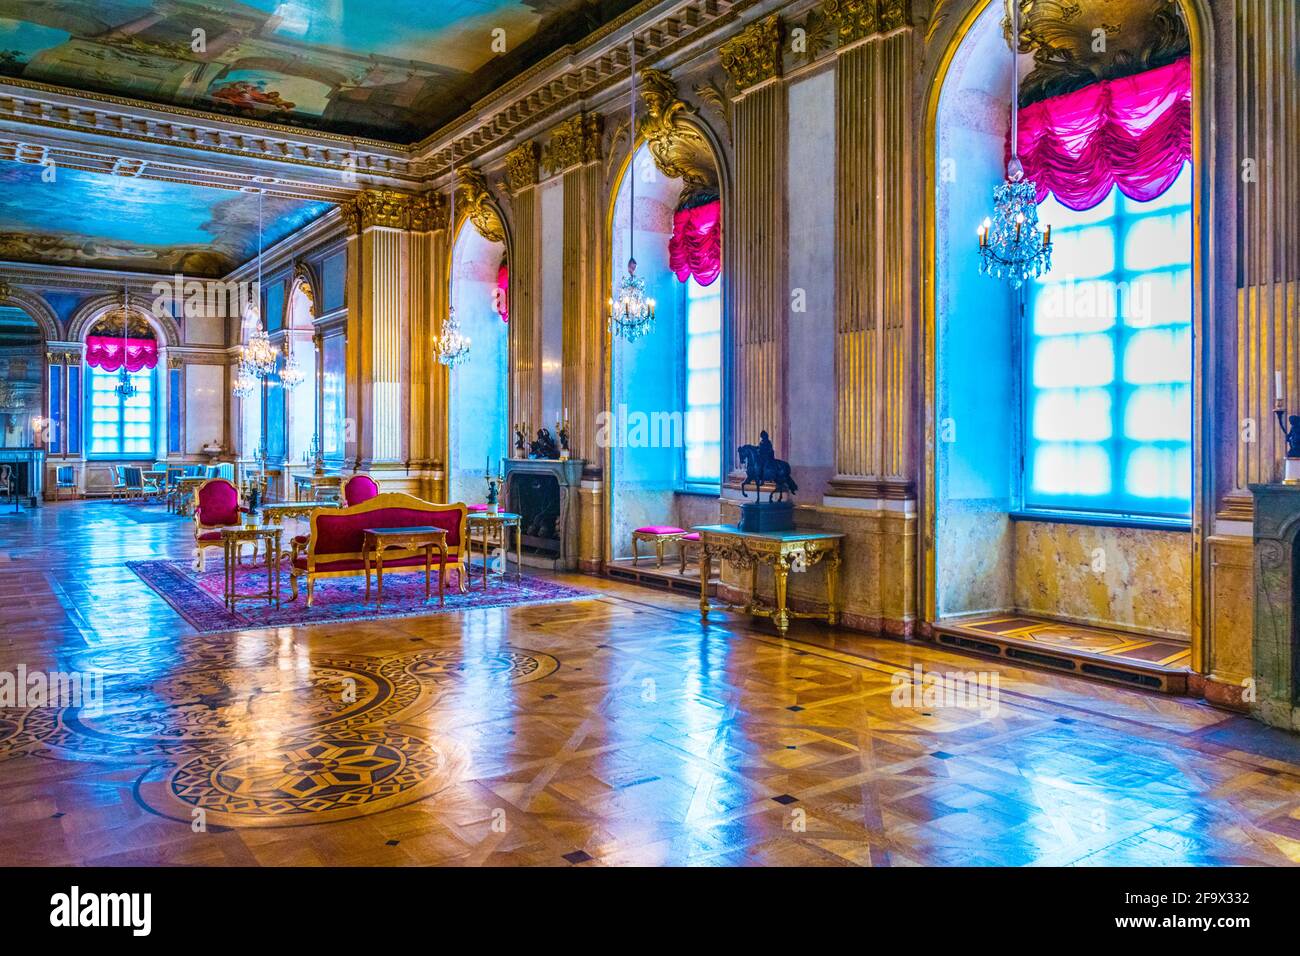 STOCKHOLM, SWEDEN, AUGUST 18, 2016: View of a hall of the Kungliga slottet castle in Gamla Stan, Stockholm, Sweden Stock Photo